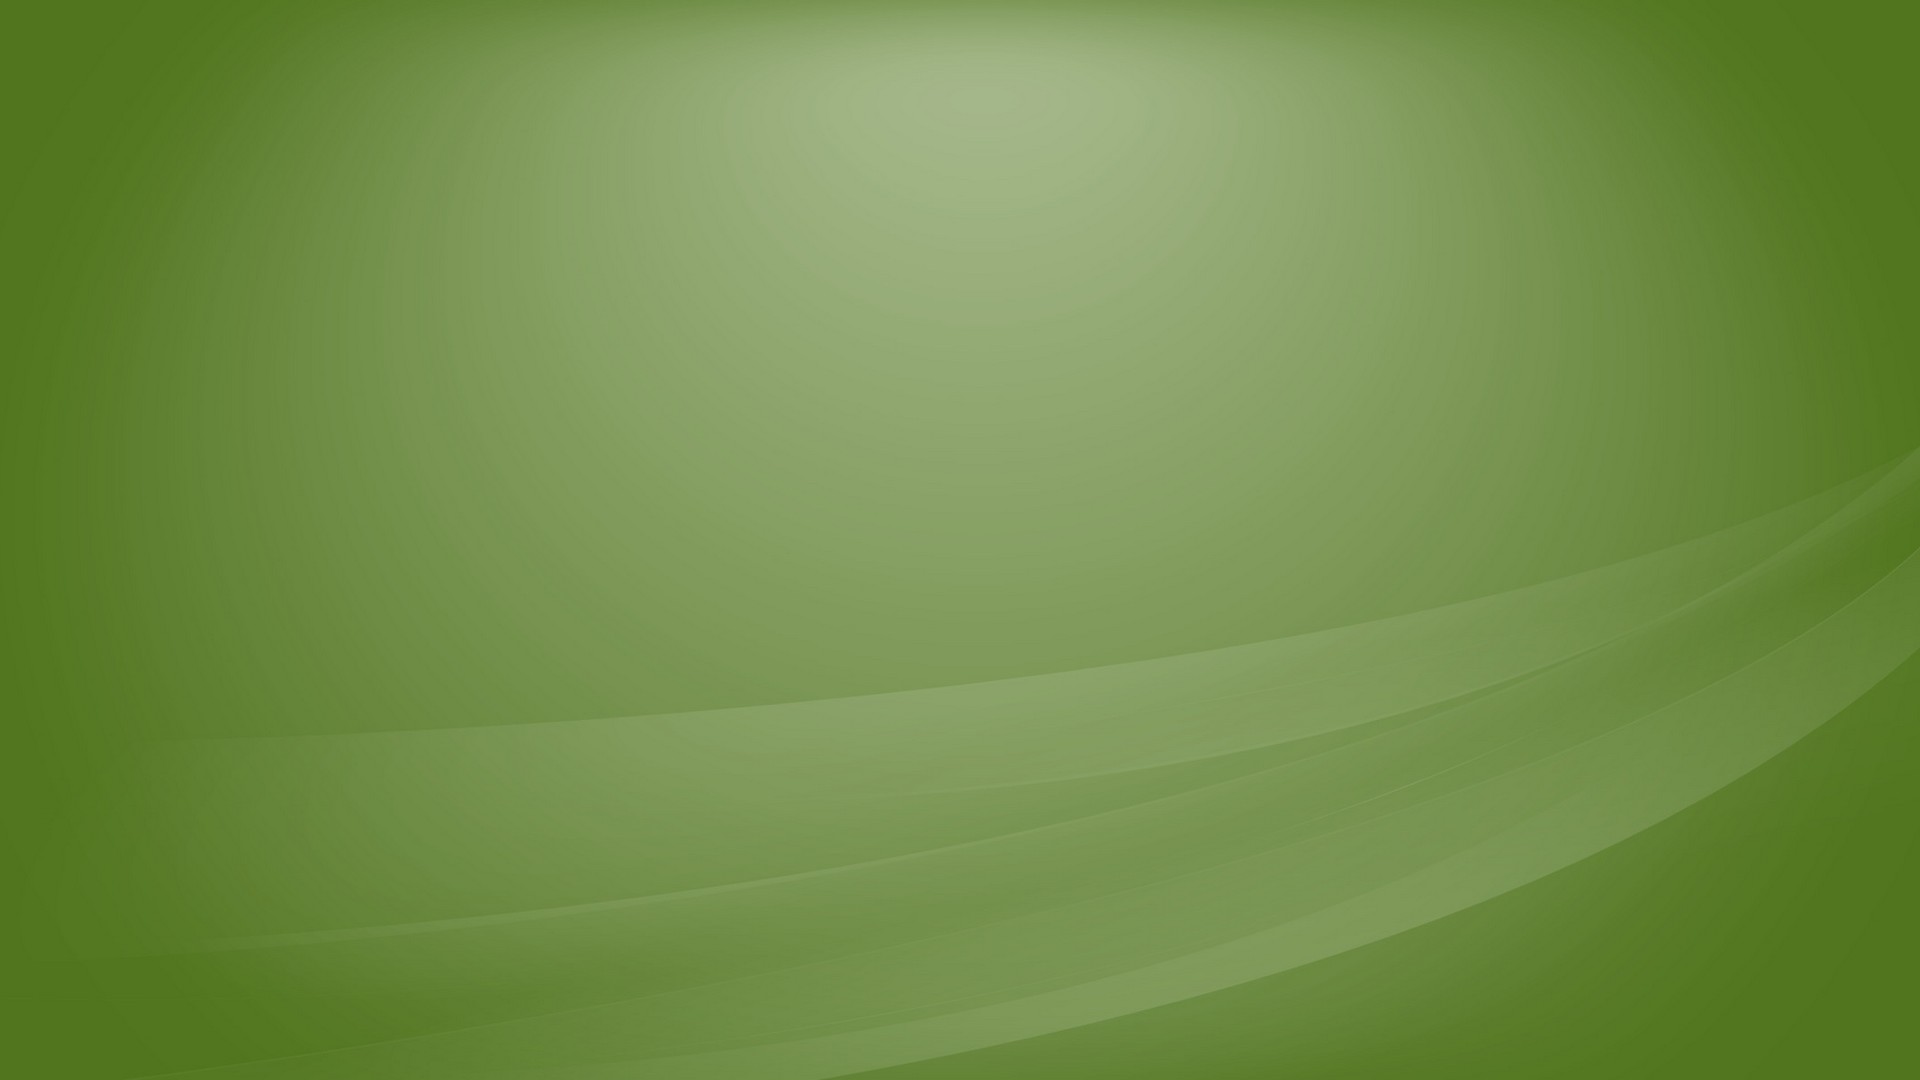 Dark Green Desktop Wallpaper with resolution 1920X1080 pixel. You can use this wallpaper as background for your desktop Computer Screensavers, Android or iPhone smartphones